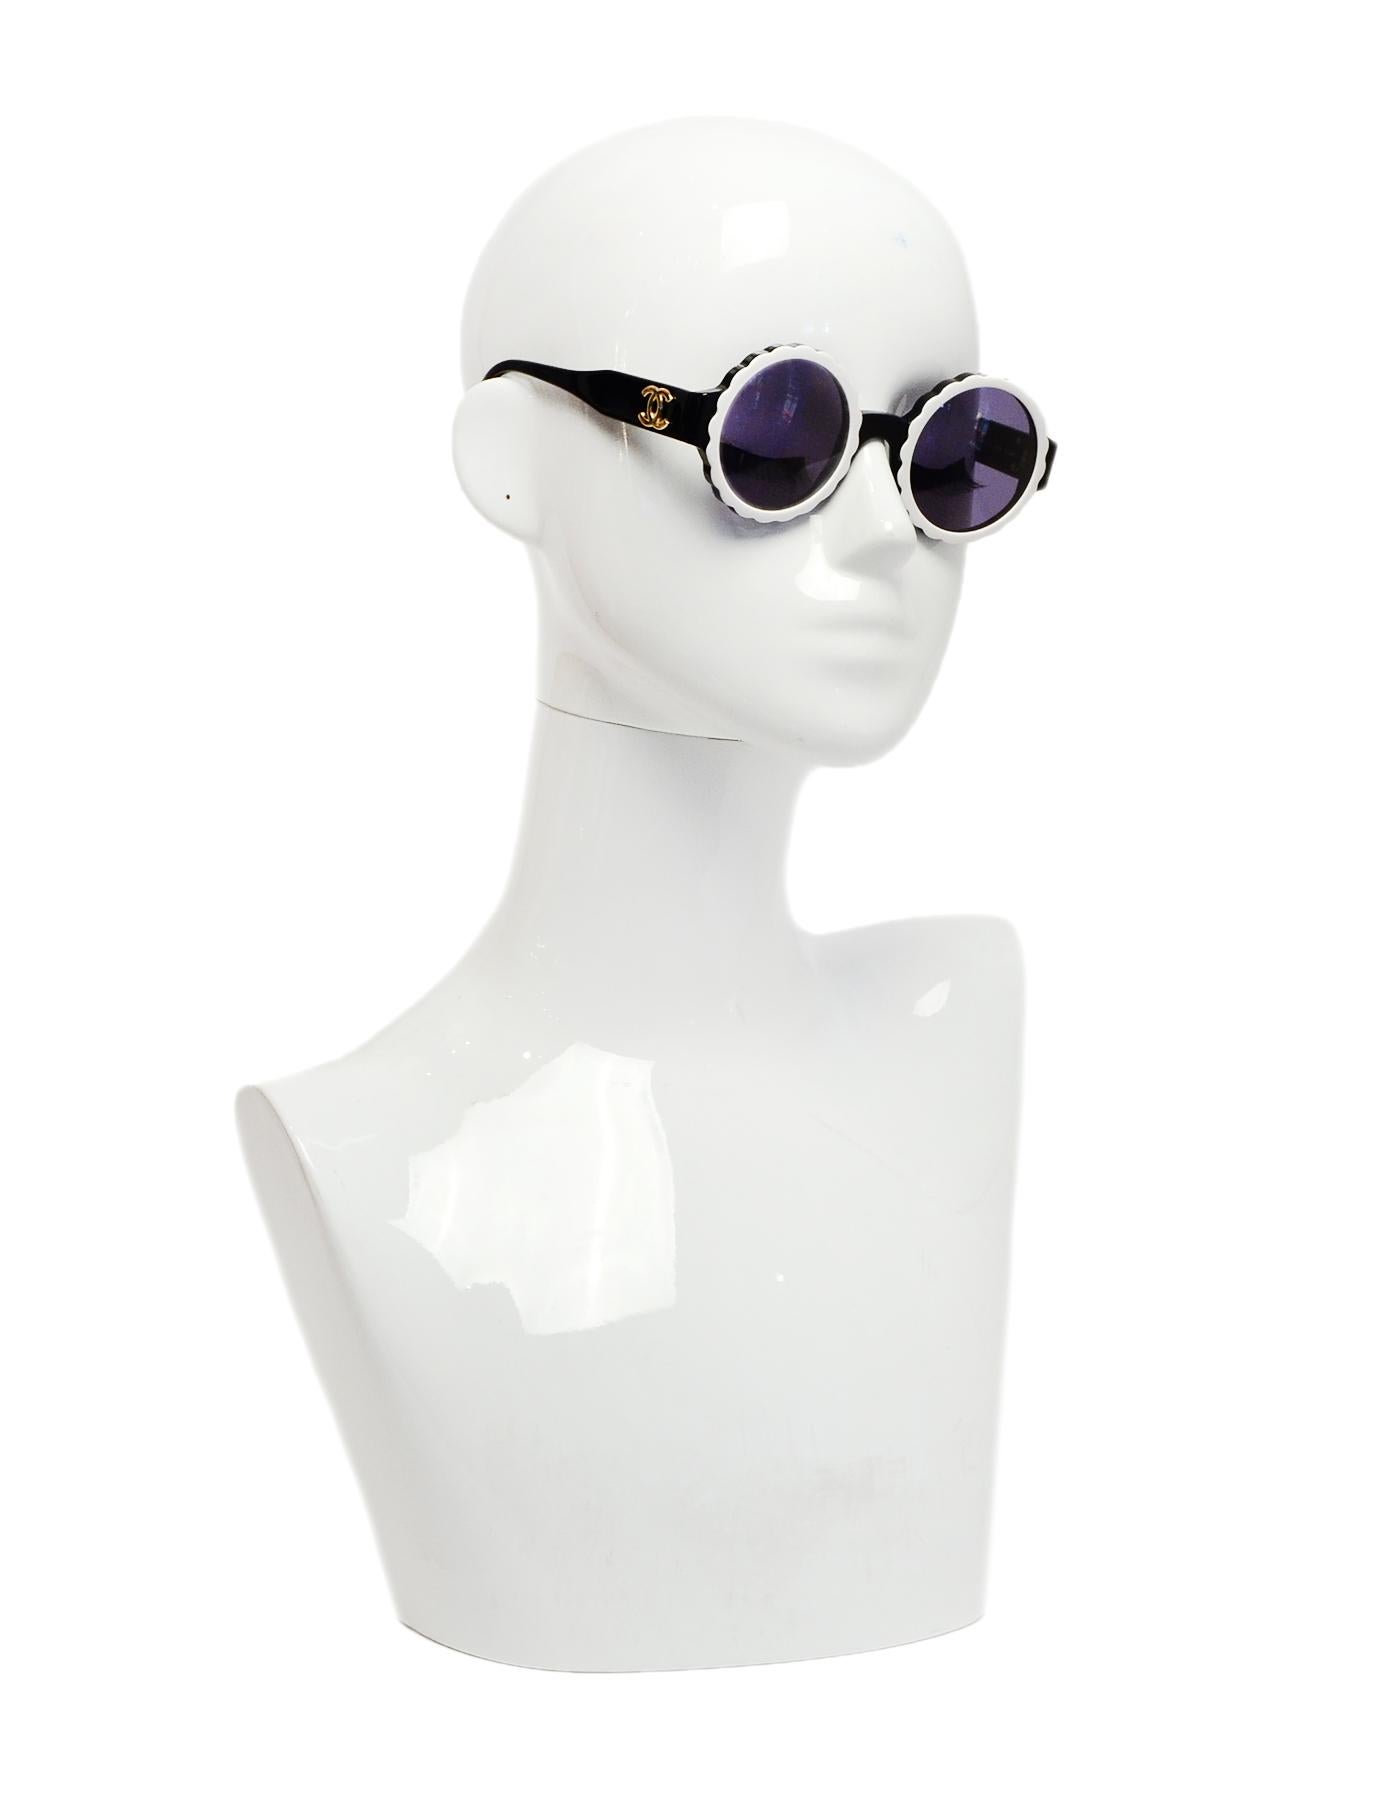 Chanel Black/White Acetate Scalloped Round Sunglasses

Made In: Italy
Year of Production: 1994
Color: Black, white
Hardware: Goldtone hardware
Materials: Acetate
Overall Condition: Very good pre-owned condition, with minor wear throughout and